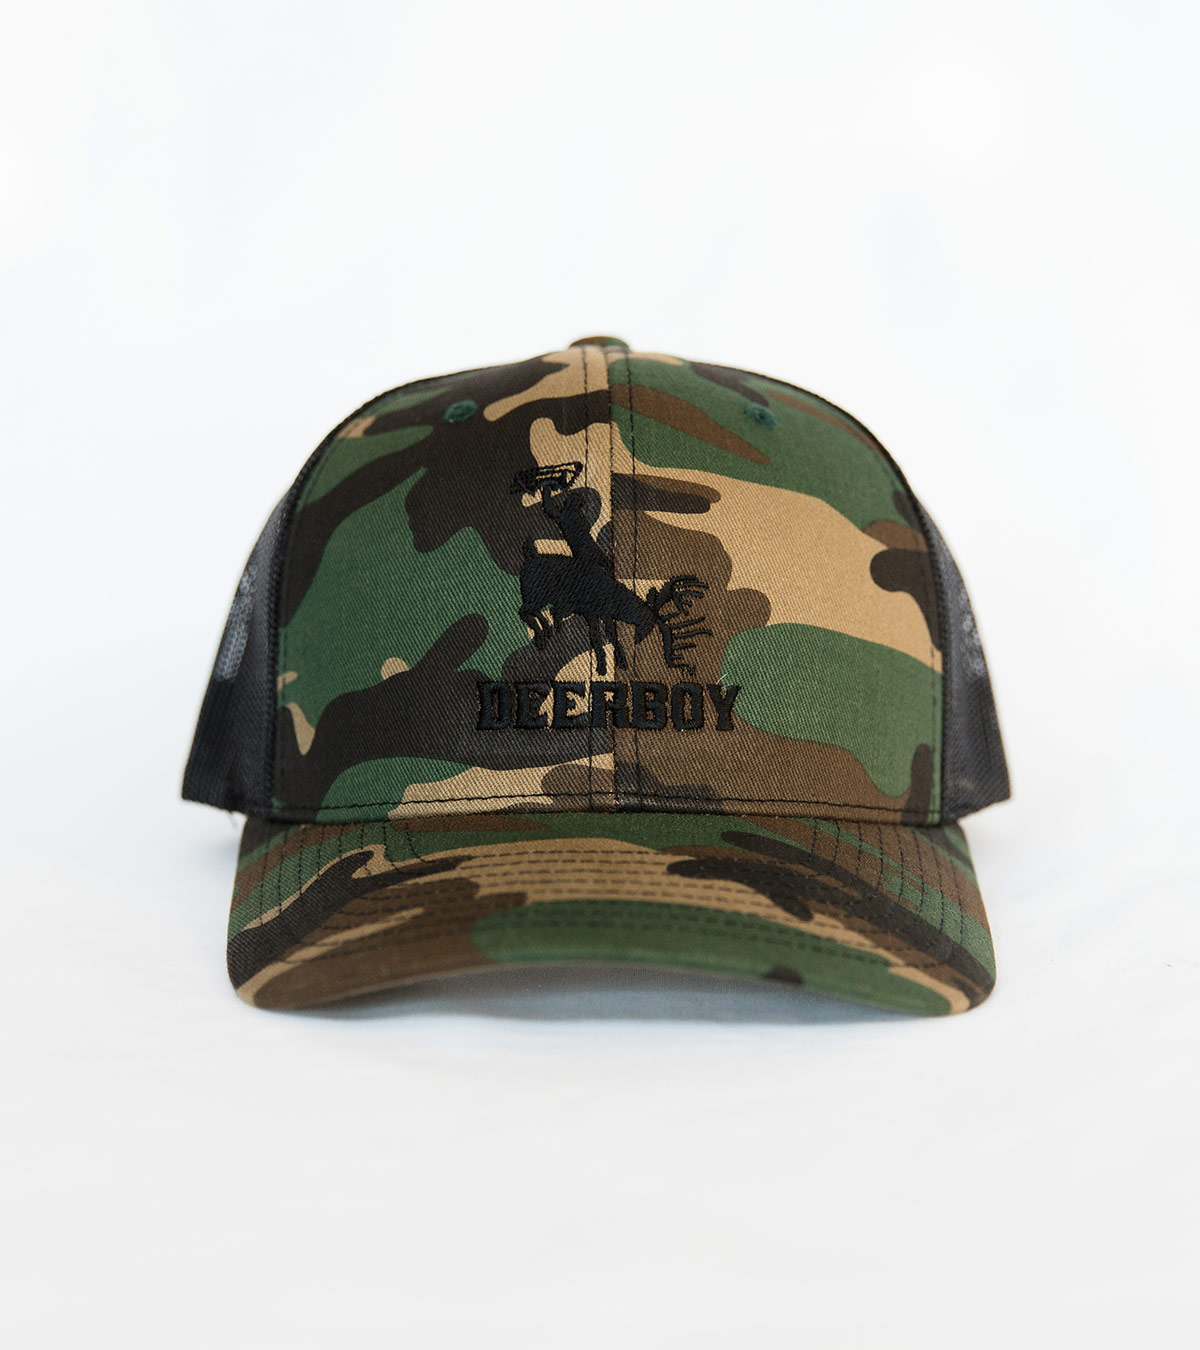 Deerboy Signature Cap Bow Logo In Camo And Black Front